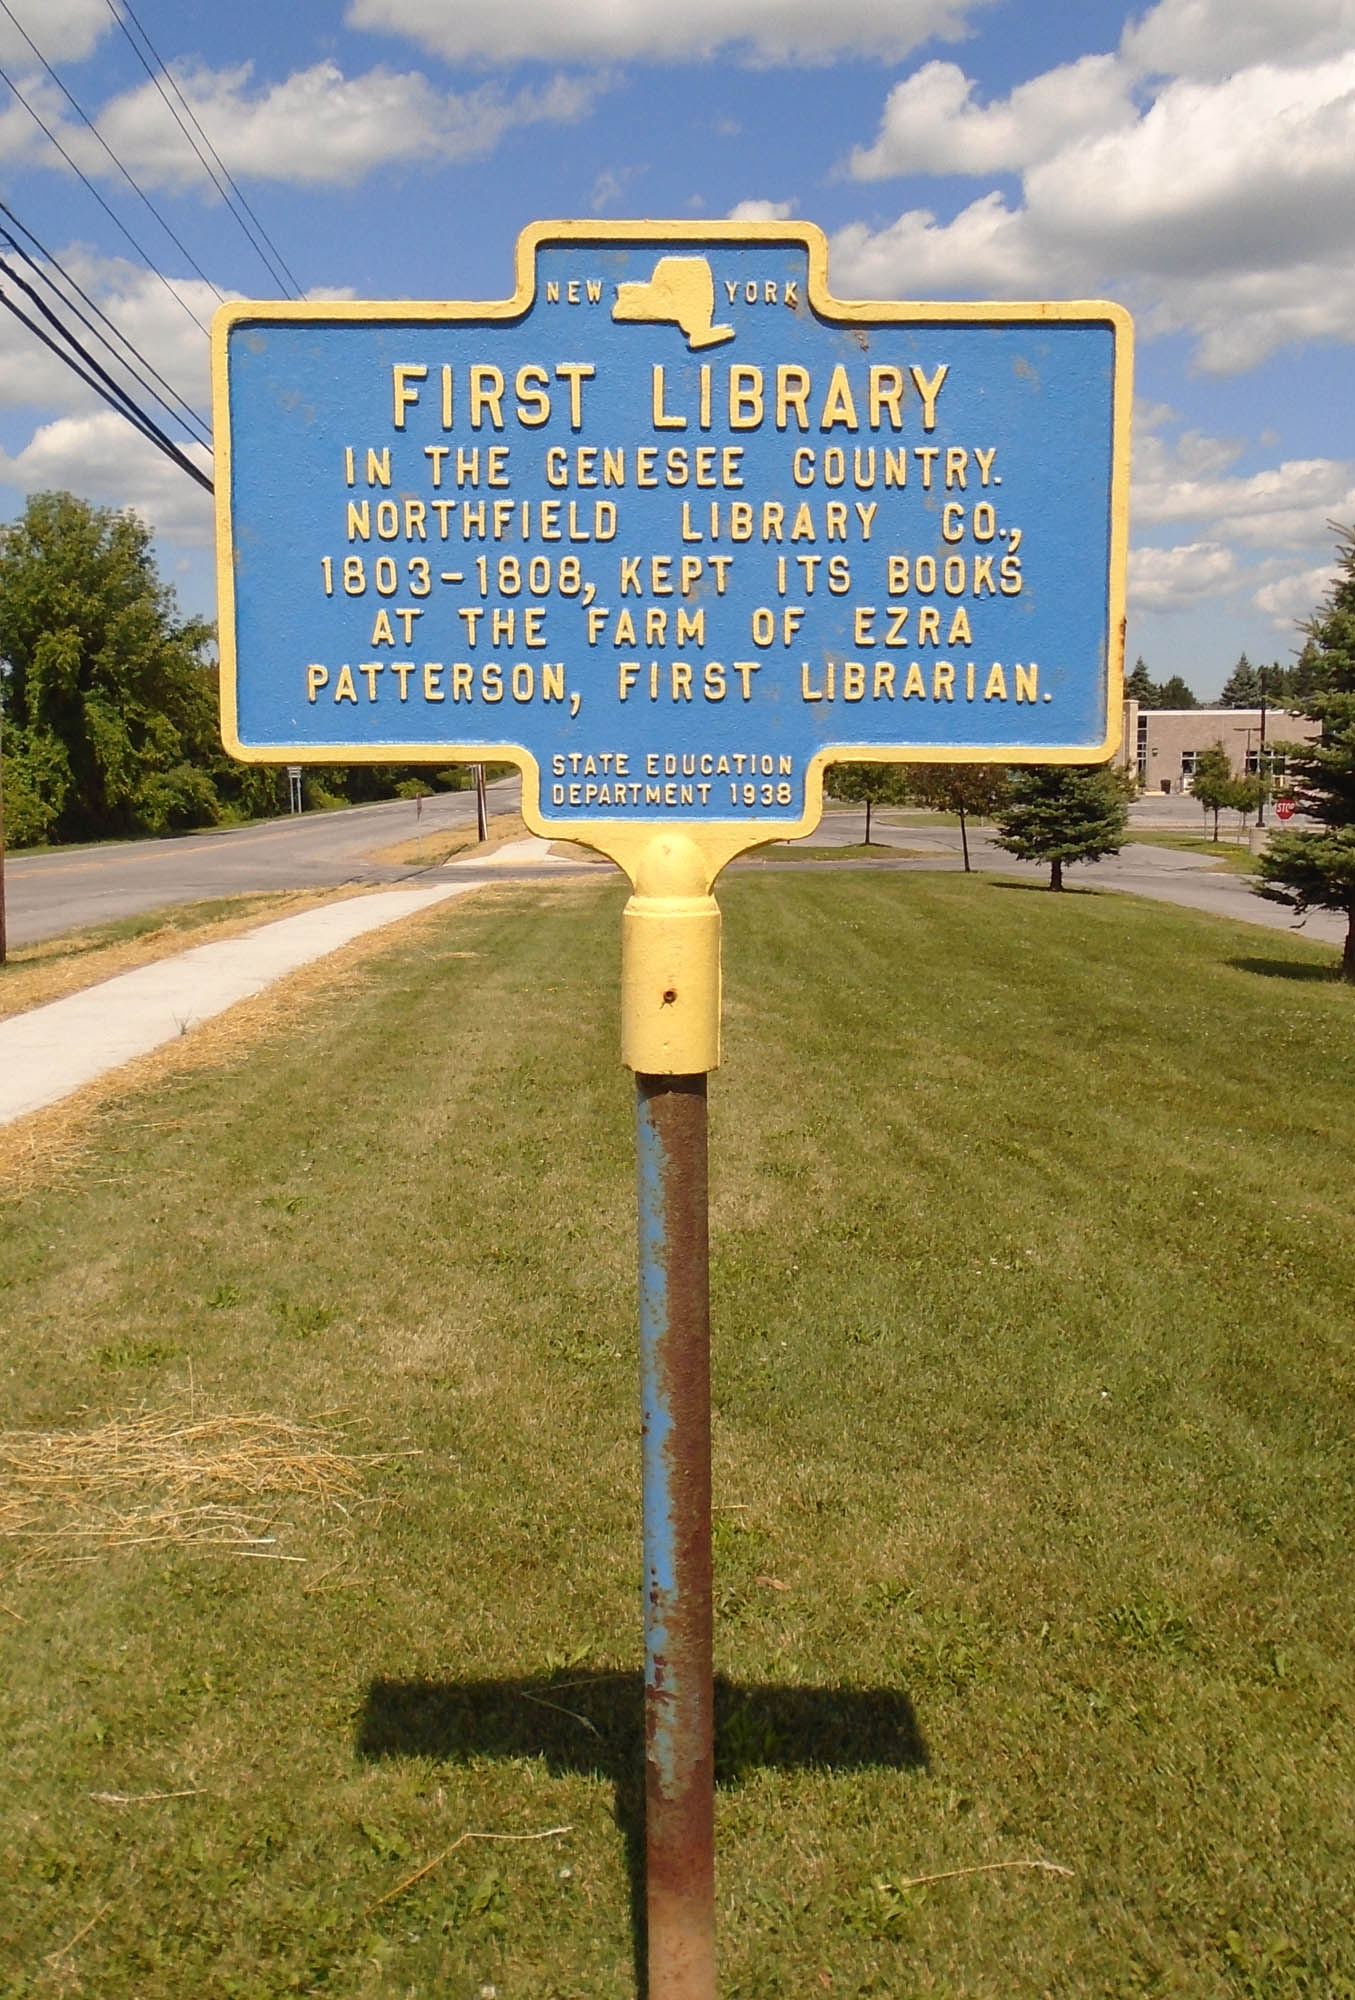 First Library, Pittsford